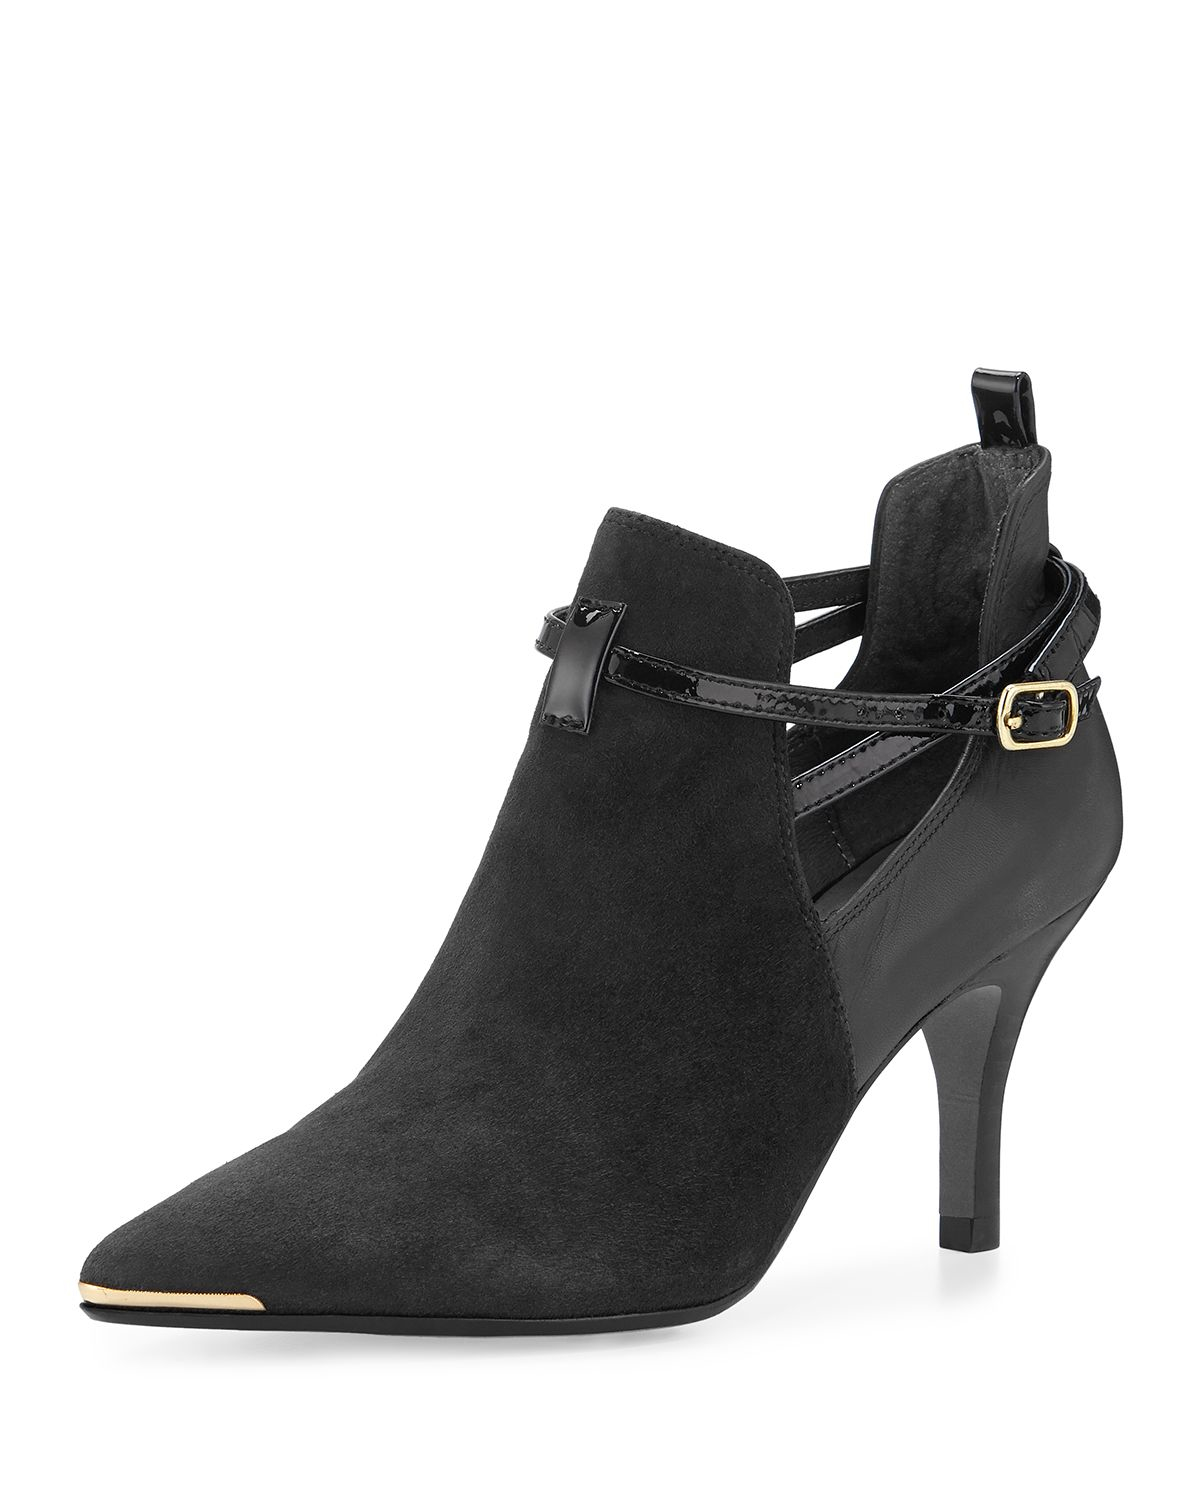 Lyst - Donald J Pliner Tali Suede Ankle Boots in Black